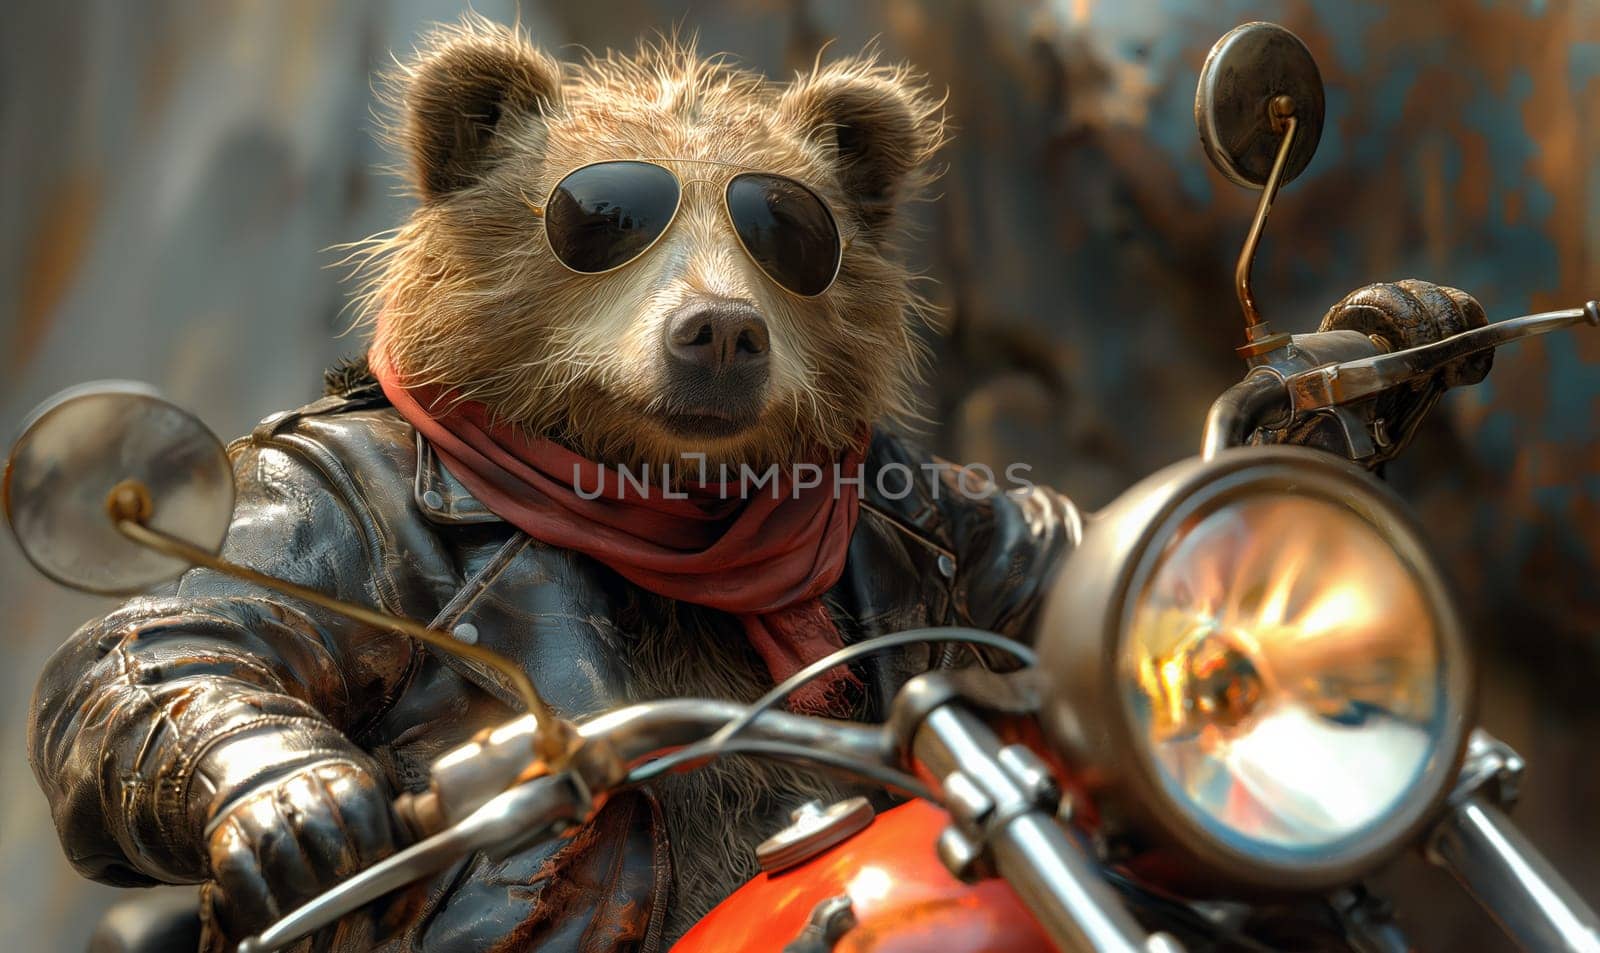 Children's illustration, a bear in sunglasses on a motorcycle. by Fischeron